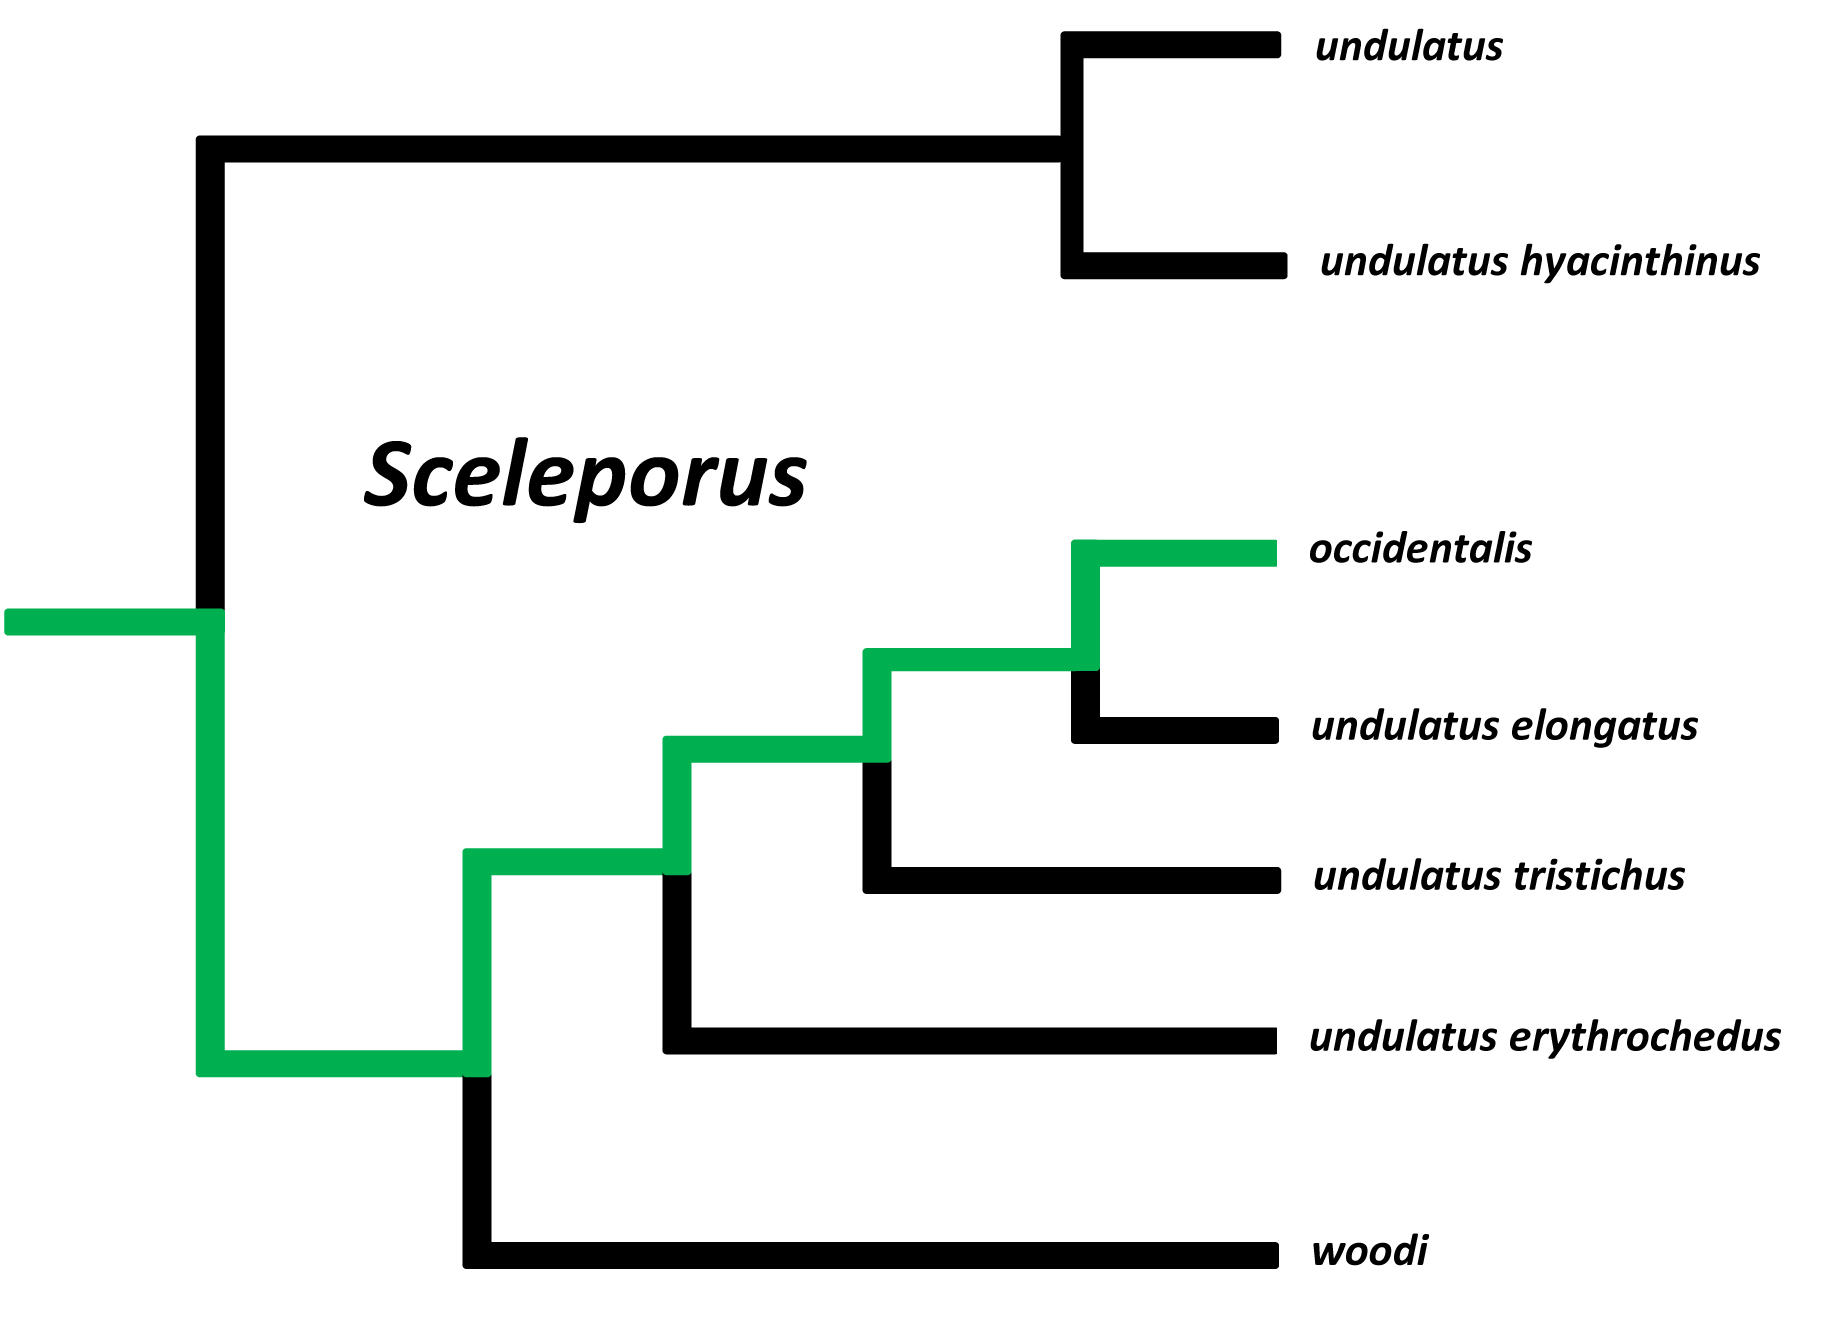 Phylogenetic tree showing the related organisma within Sceloporus 